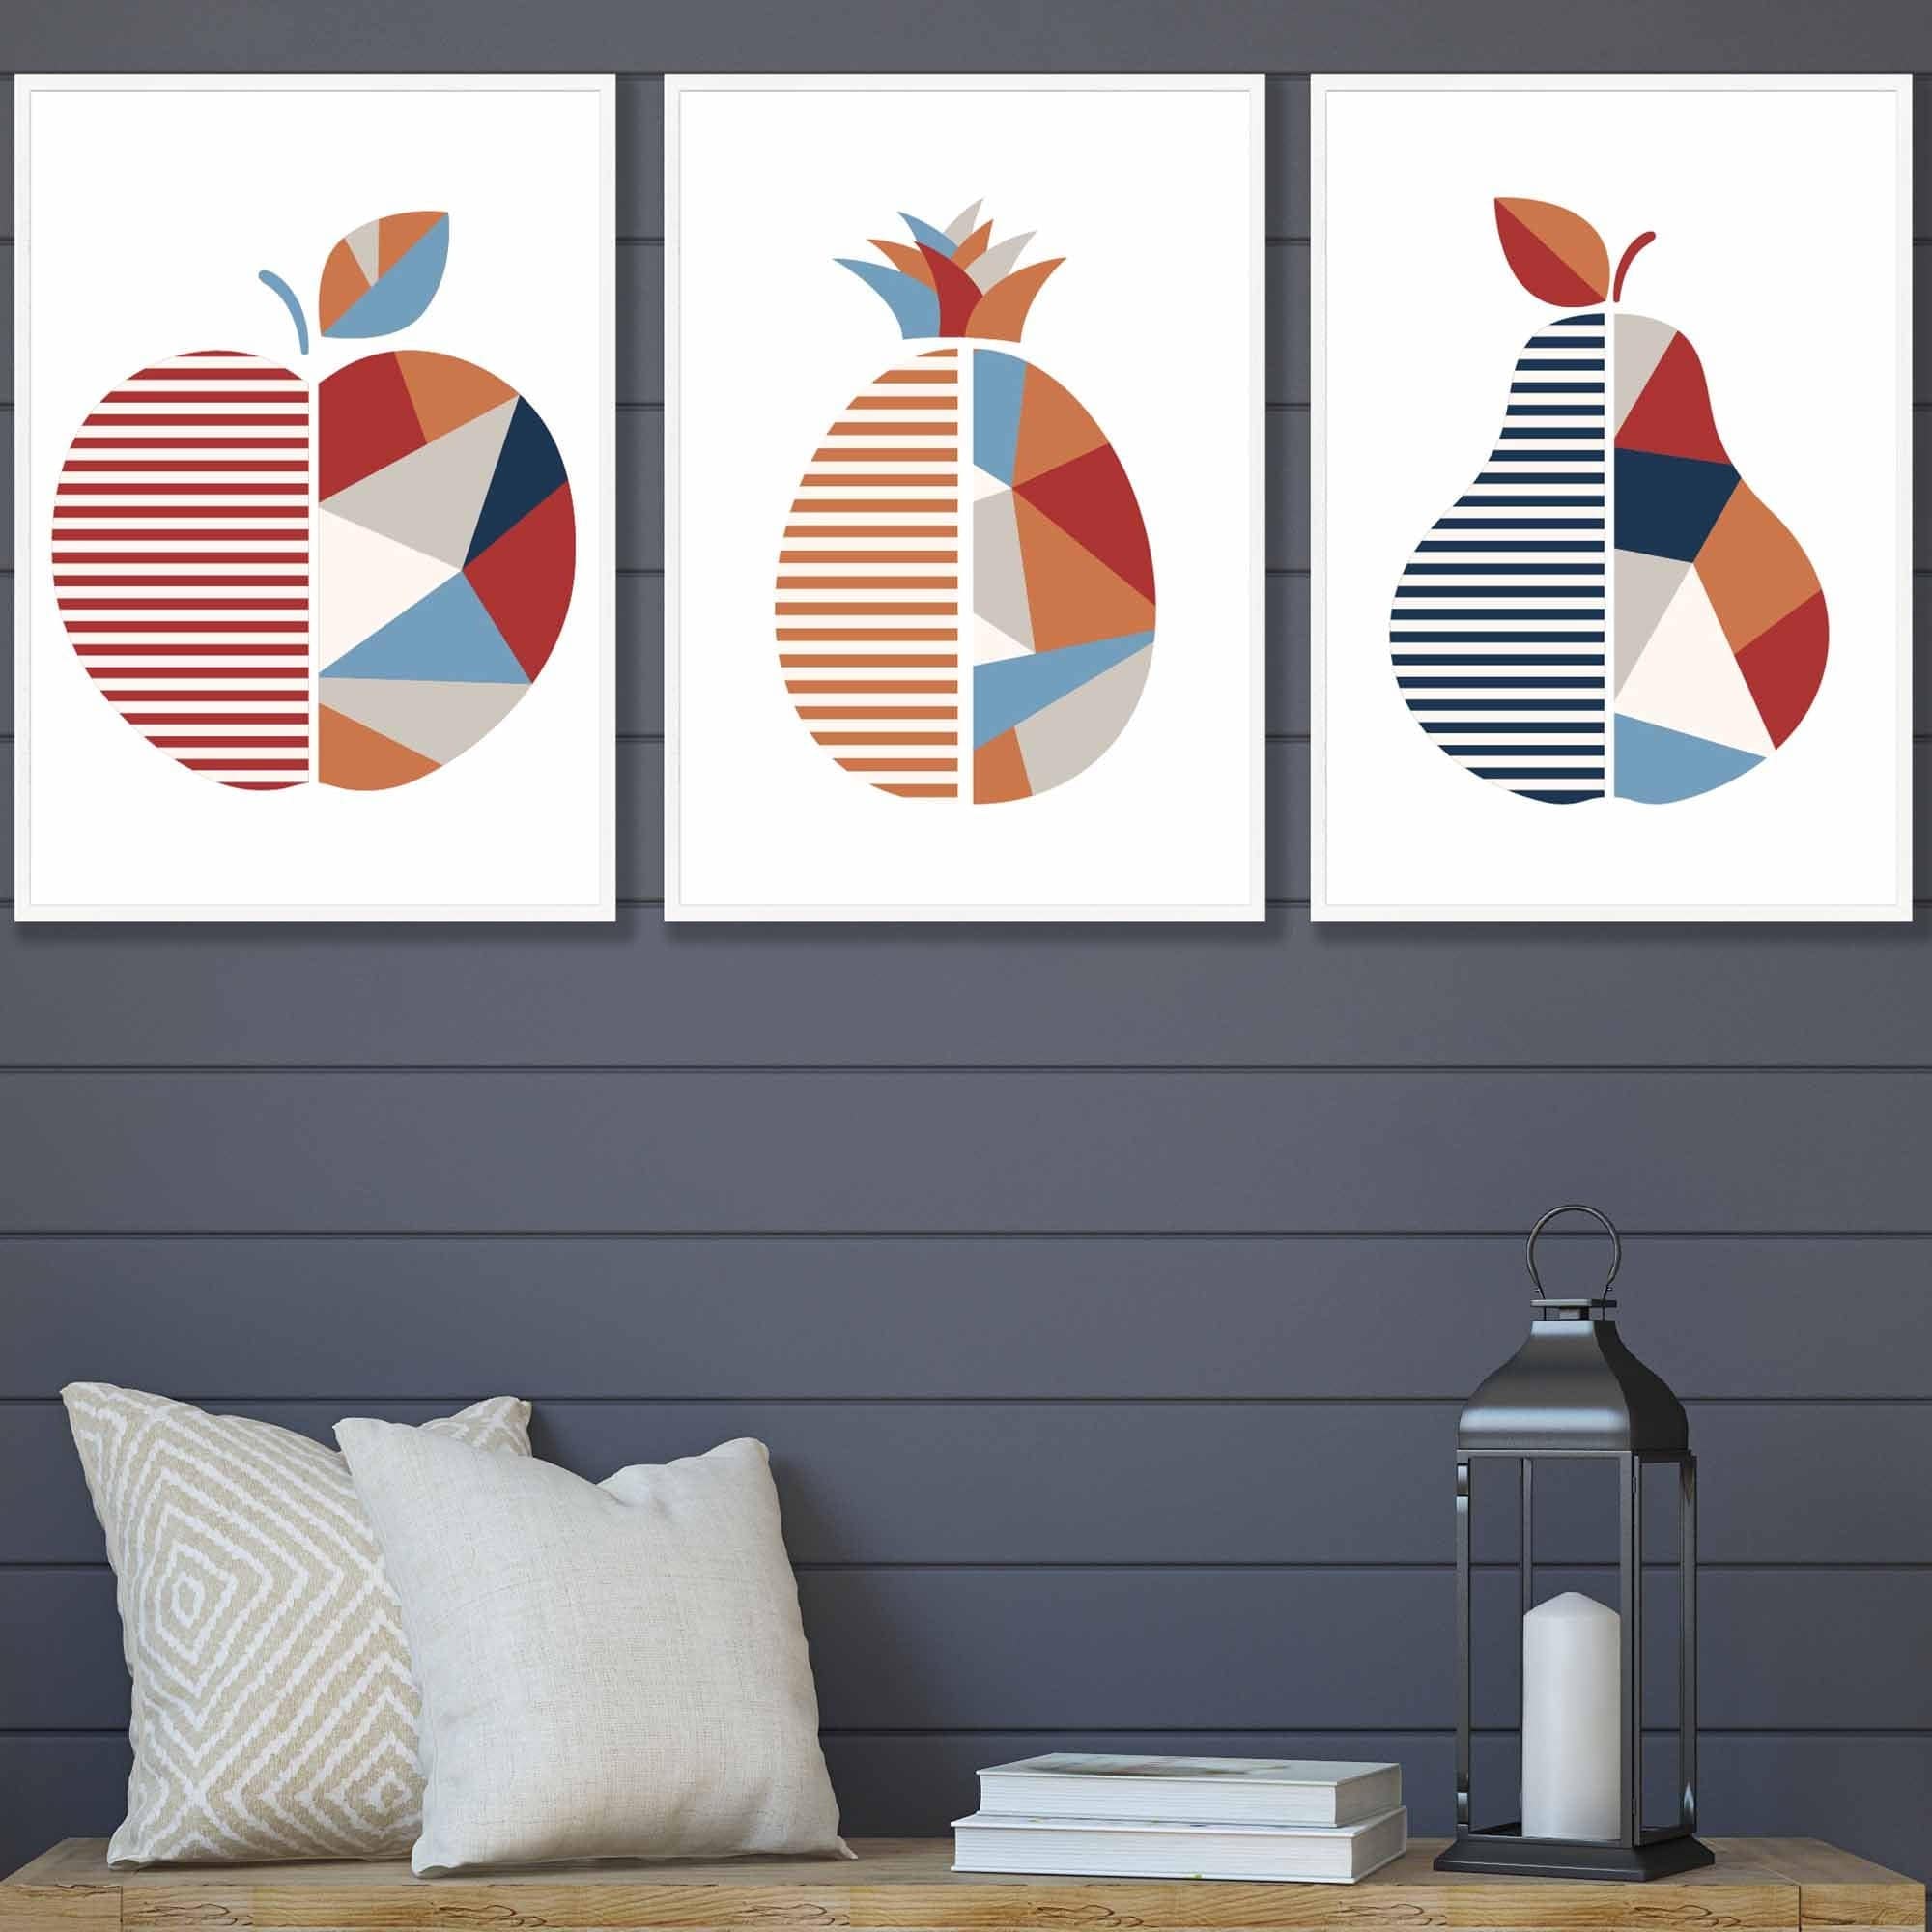 Set of 3 FRAMED Geometric Apple Pineapple Pear Fruit Kitchen Wall Art in Red, Blue and Orange